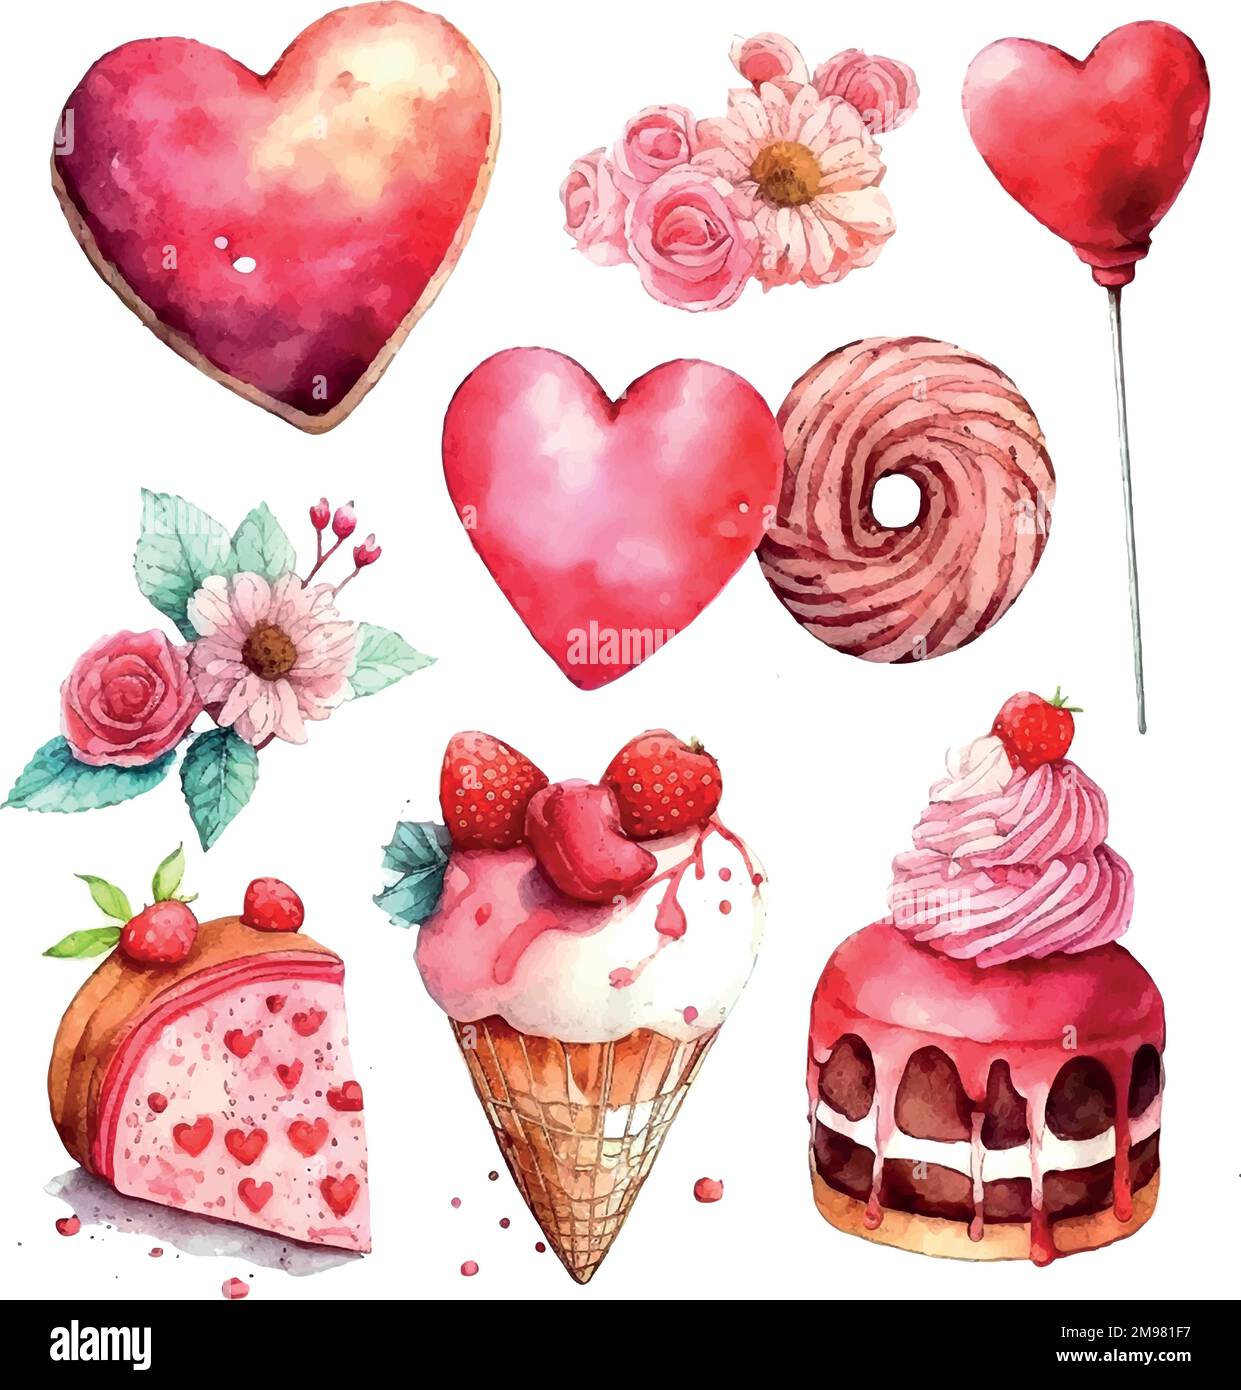 Vector cute objects and elements for Valentine's Day cards: heart, sweets, coffee, cake, key, candy, letter, diamond, rose, lollipop, ice cream cart Stock Vector